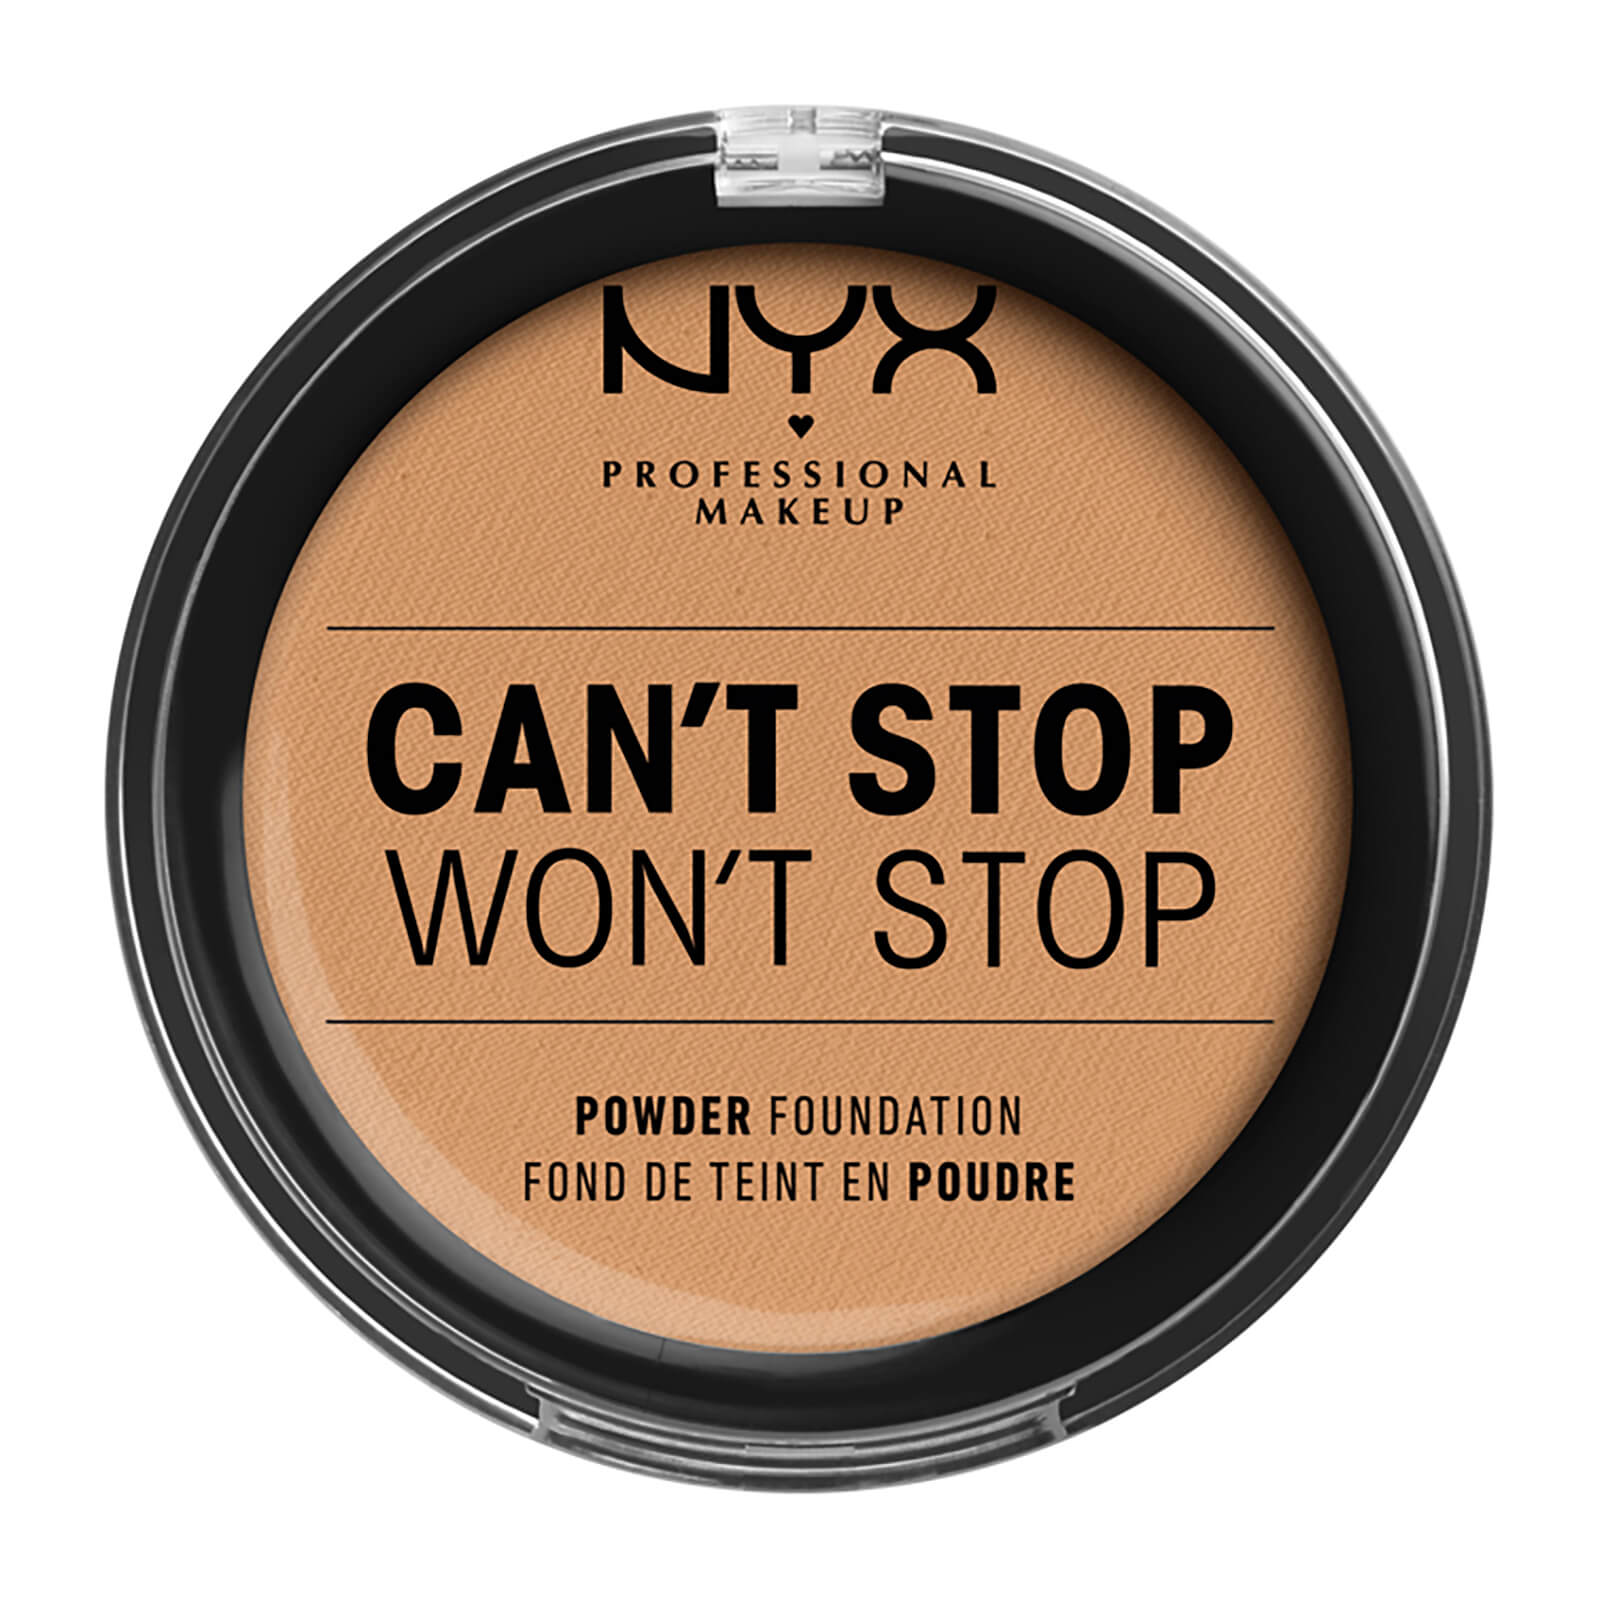 nyx professional makeup can't stop won't stop powder foundation (various shades) - soft beige